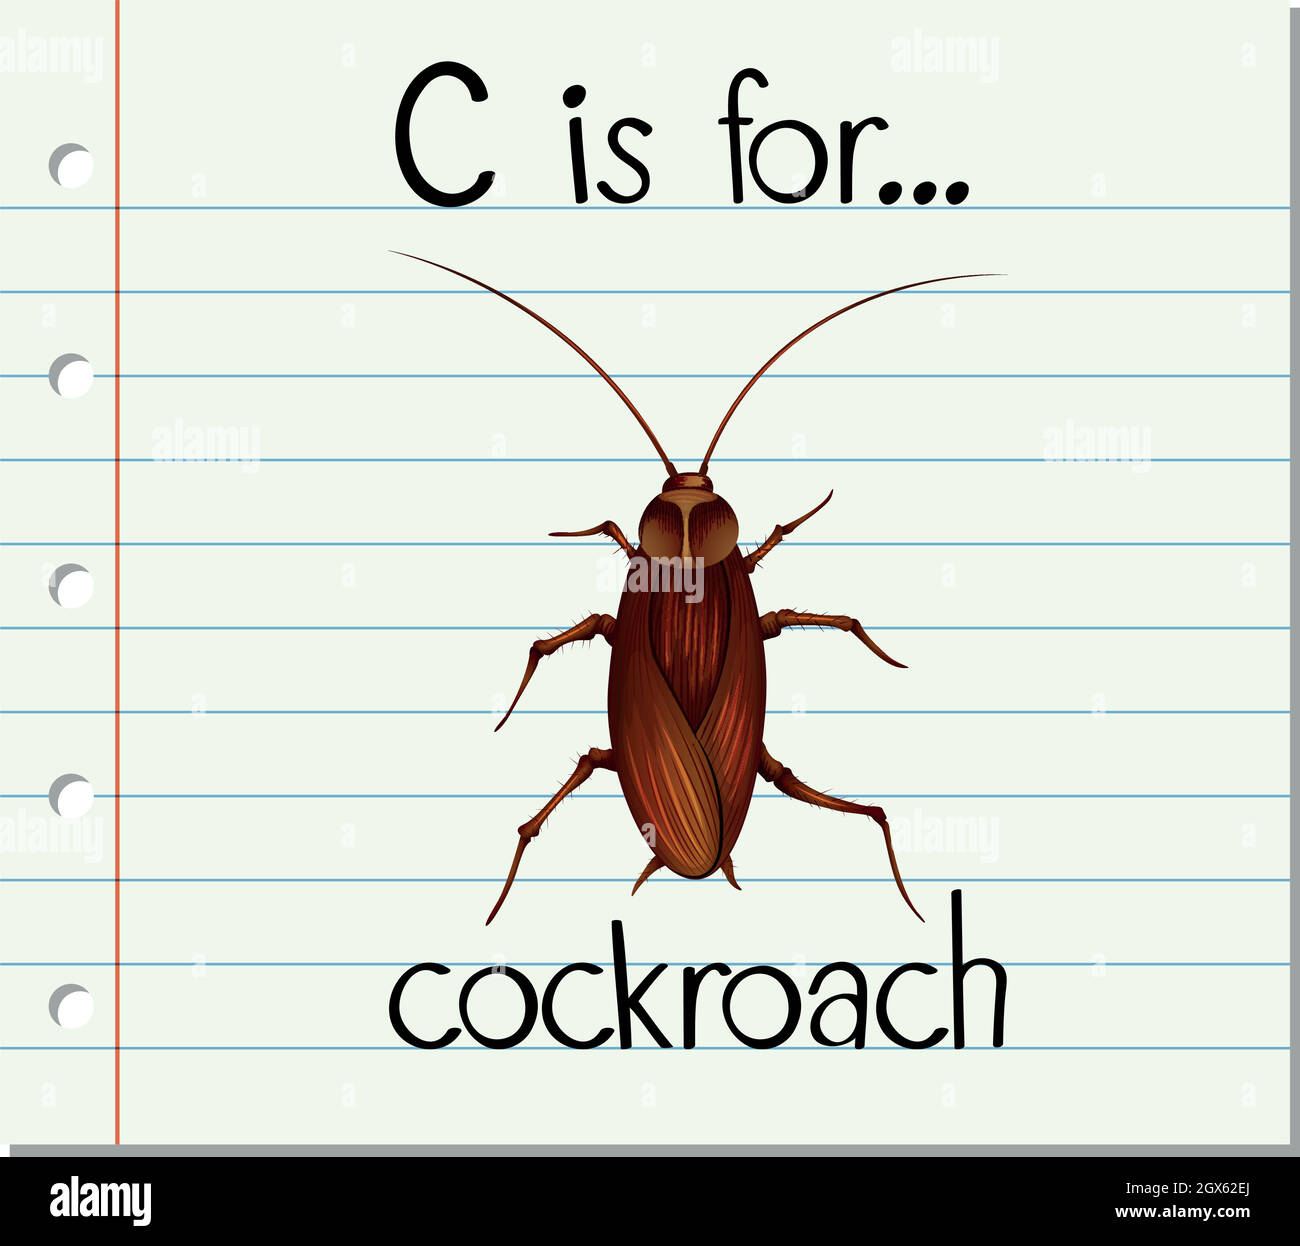 Flashcard letter C is for cockroach Stock Vector